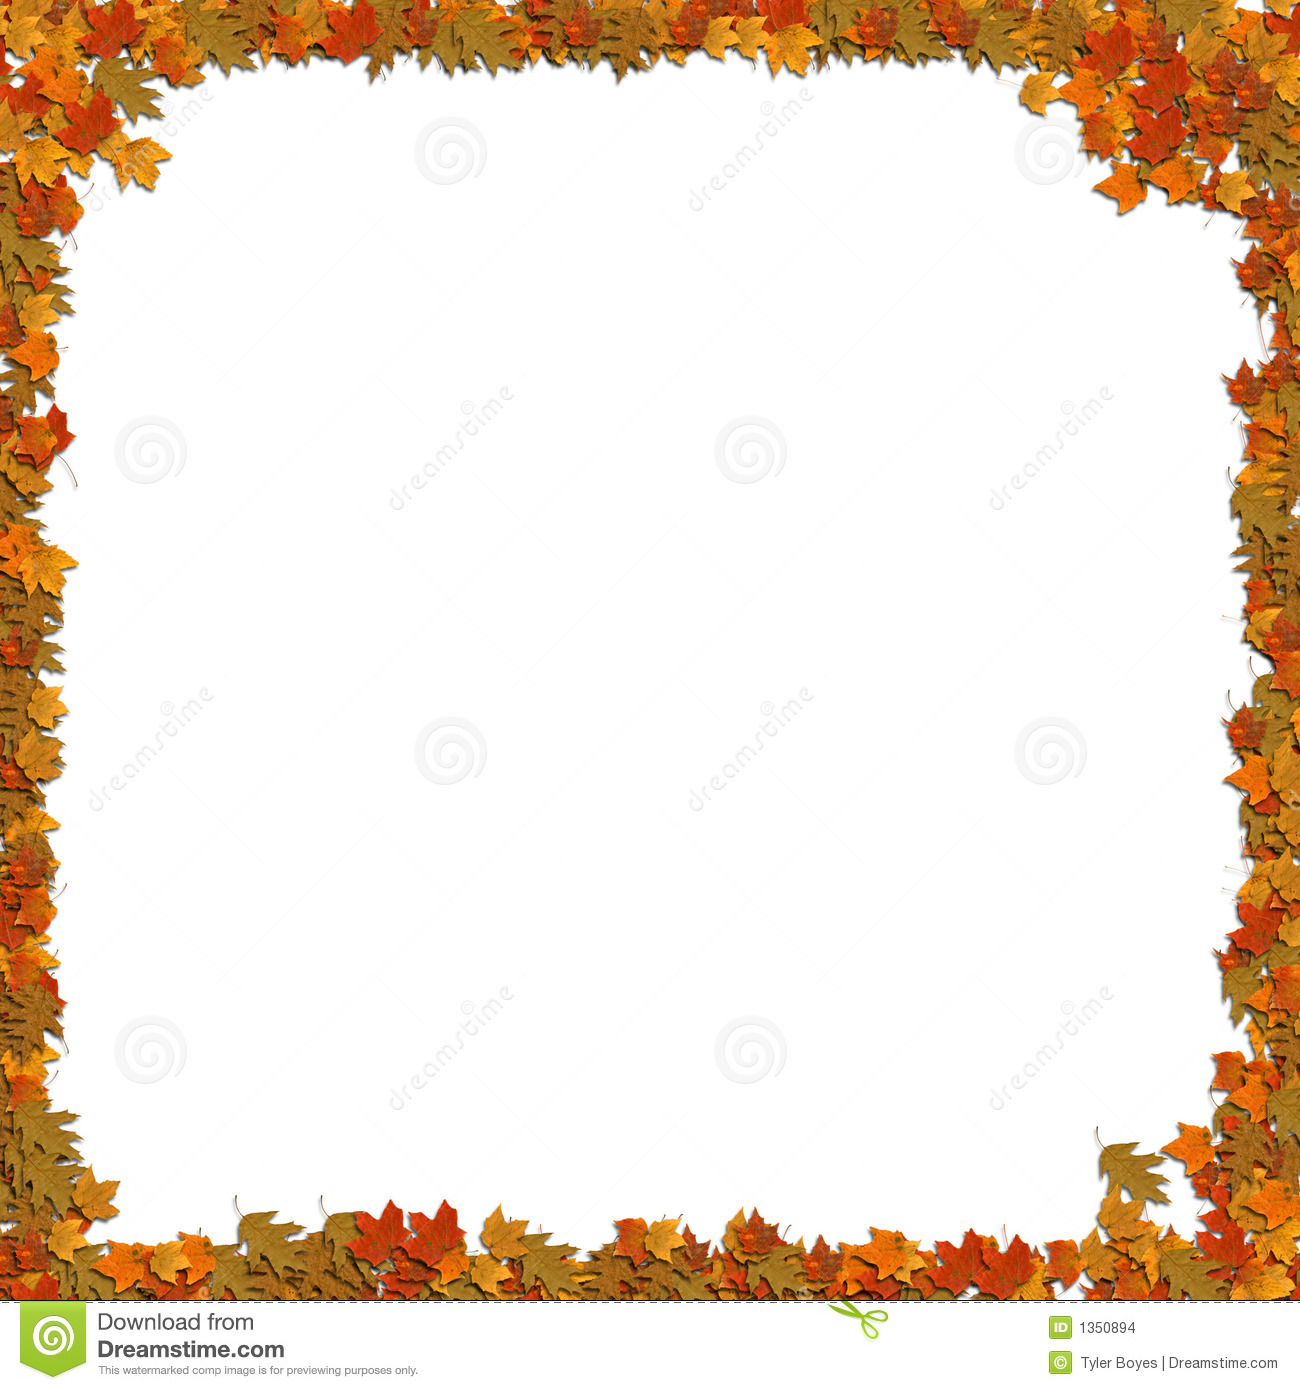 Frame Of Leafs Stock Images   Image  1350894